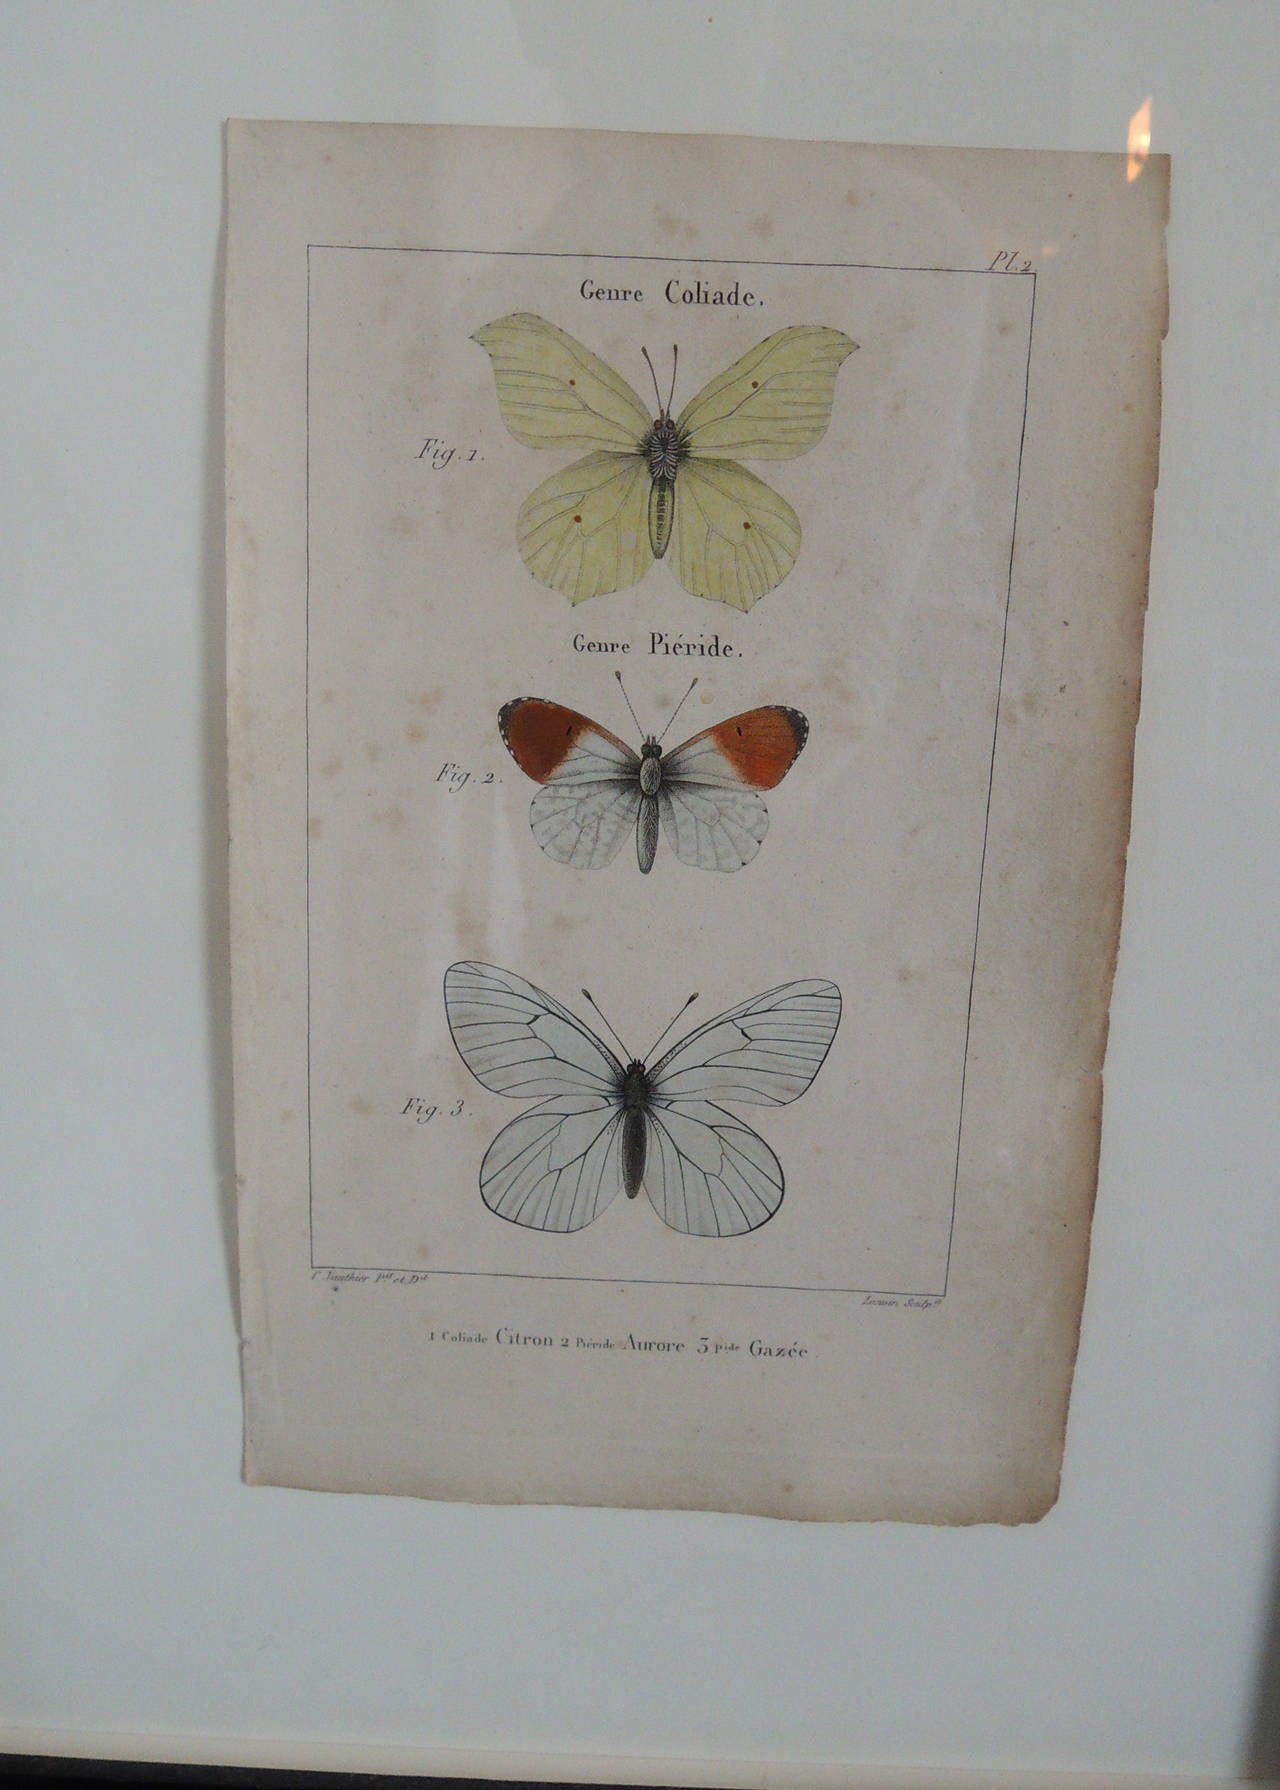 Hand colored engravings of butterflies and moths.
French, 19th century.
Floated in black frames, under UV glass.